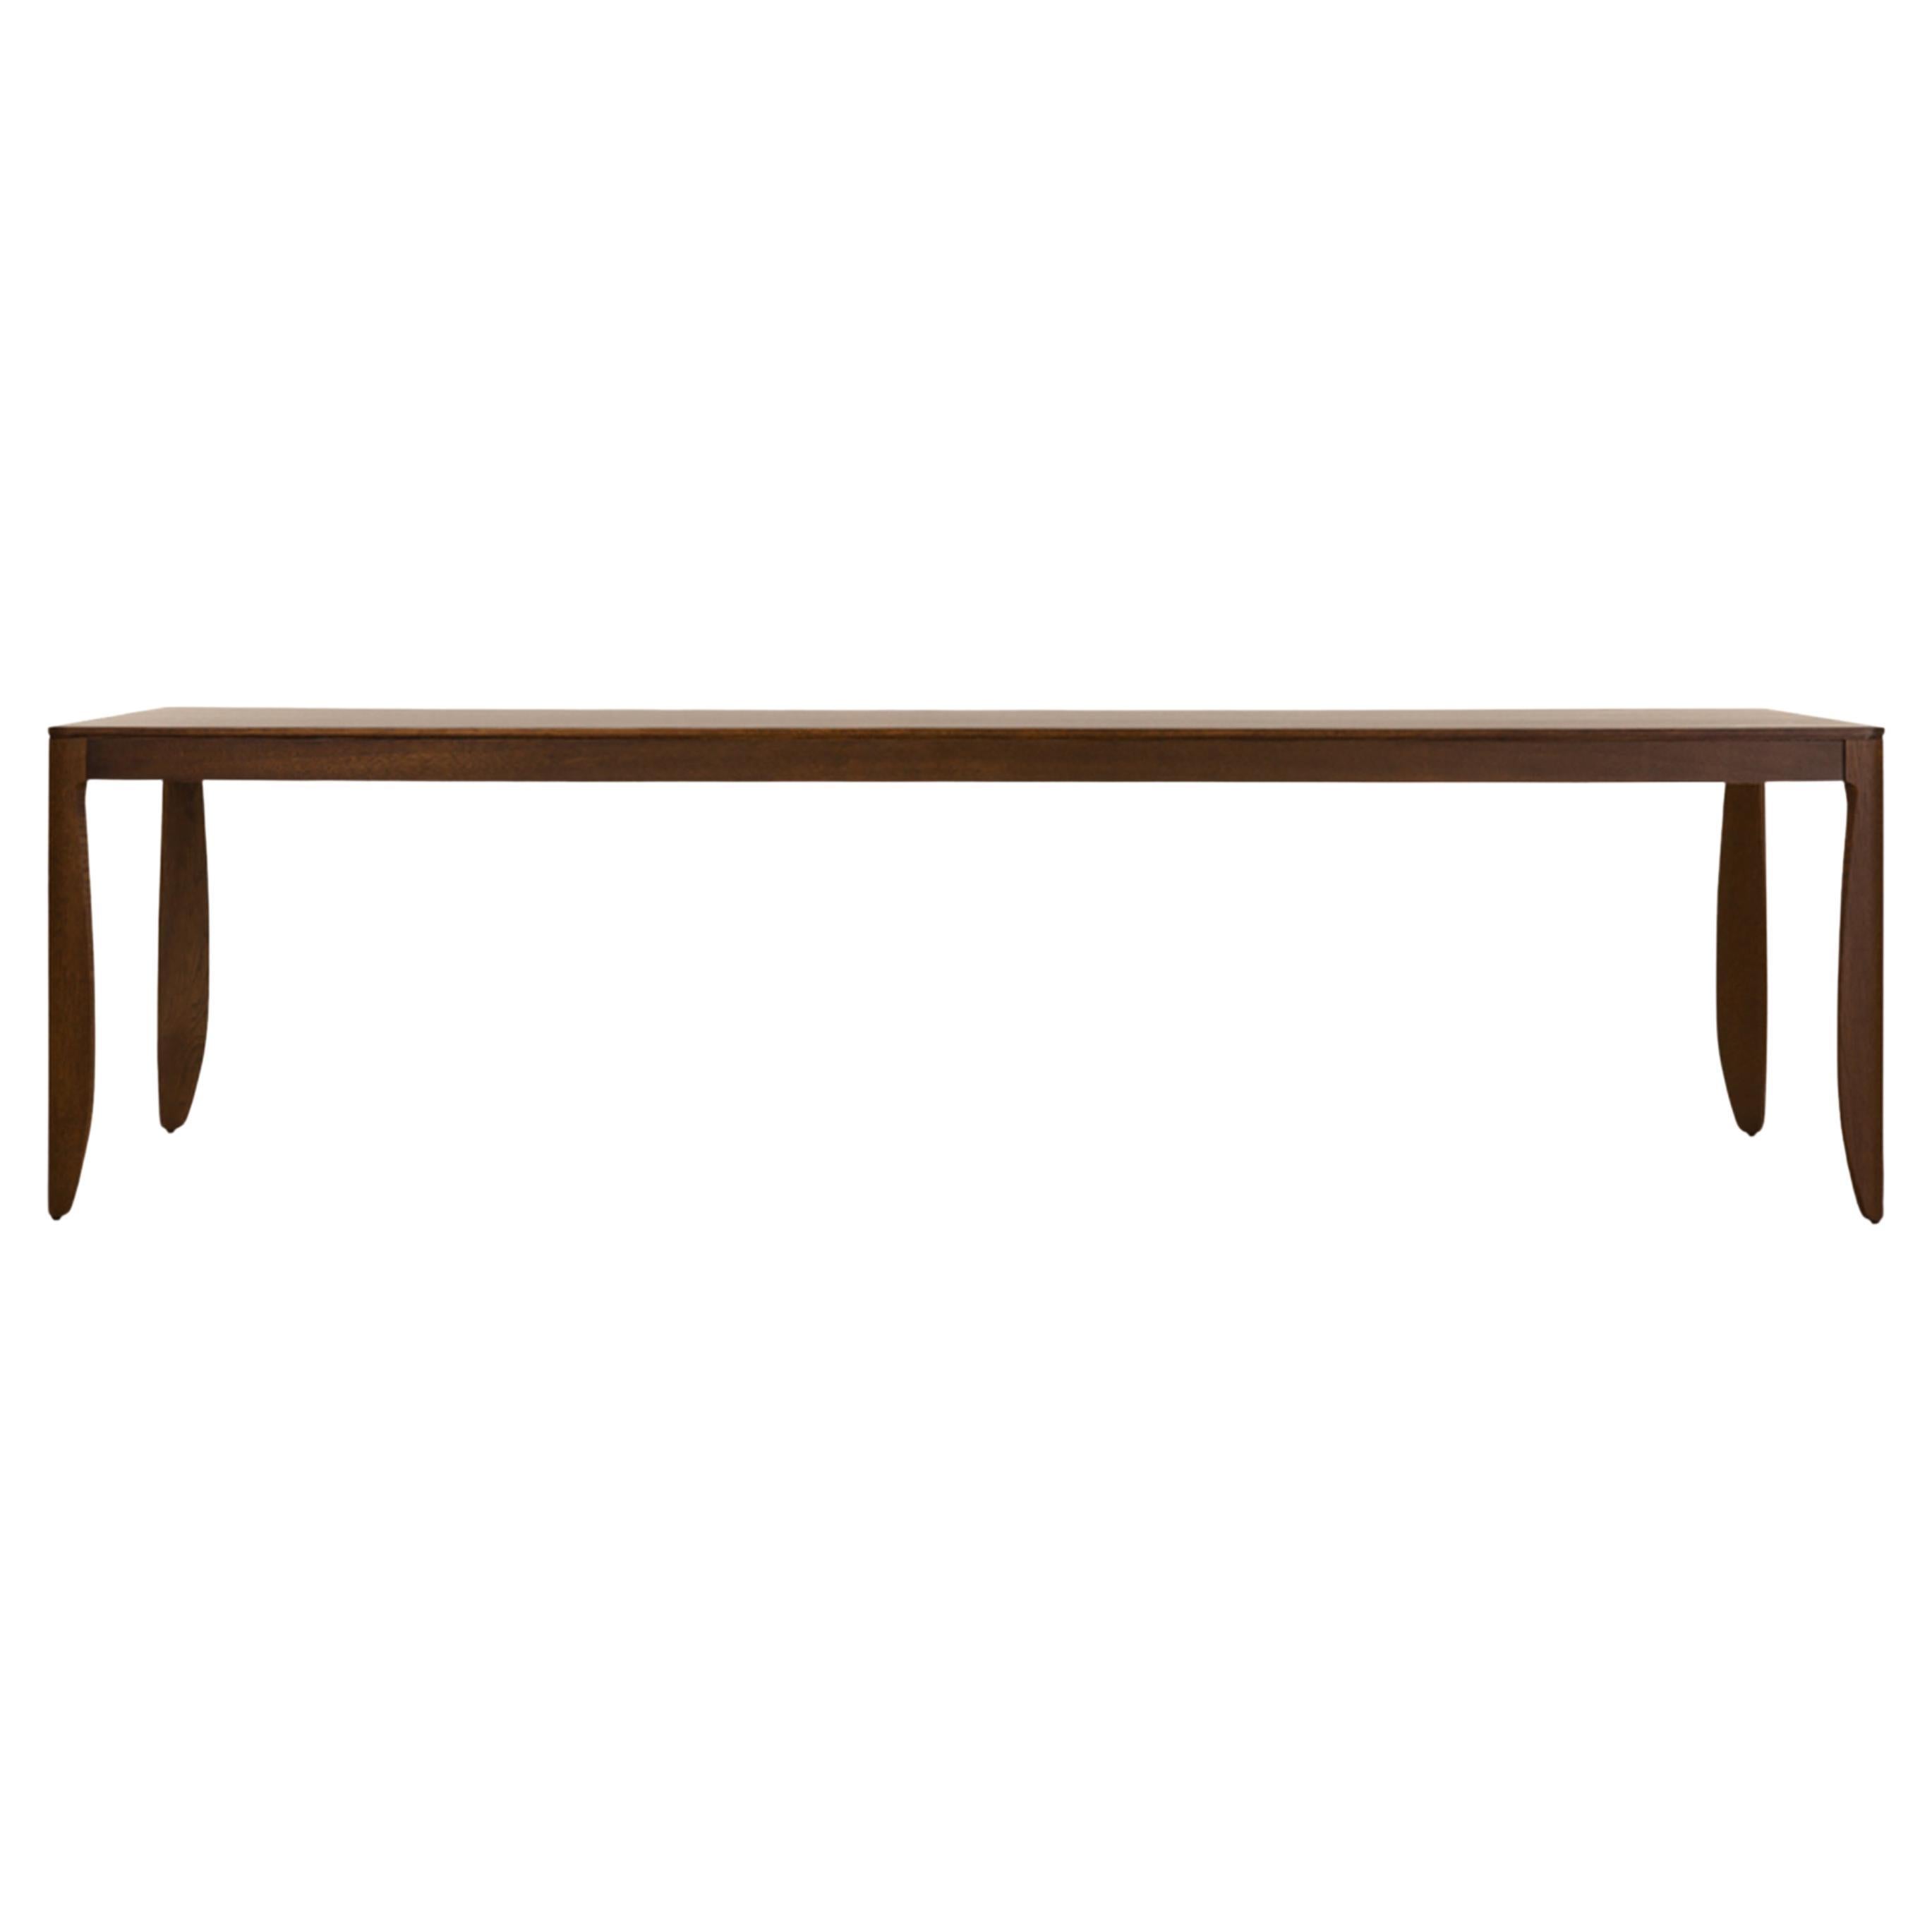 Moooi Monster Large Table Cinnamon Stained Oak by Marcel Wanders Studio For Sale